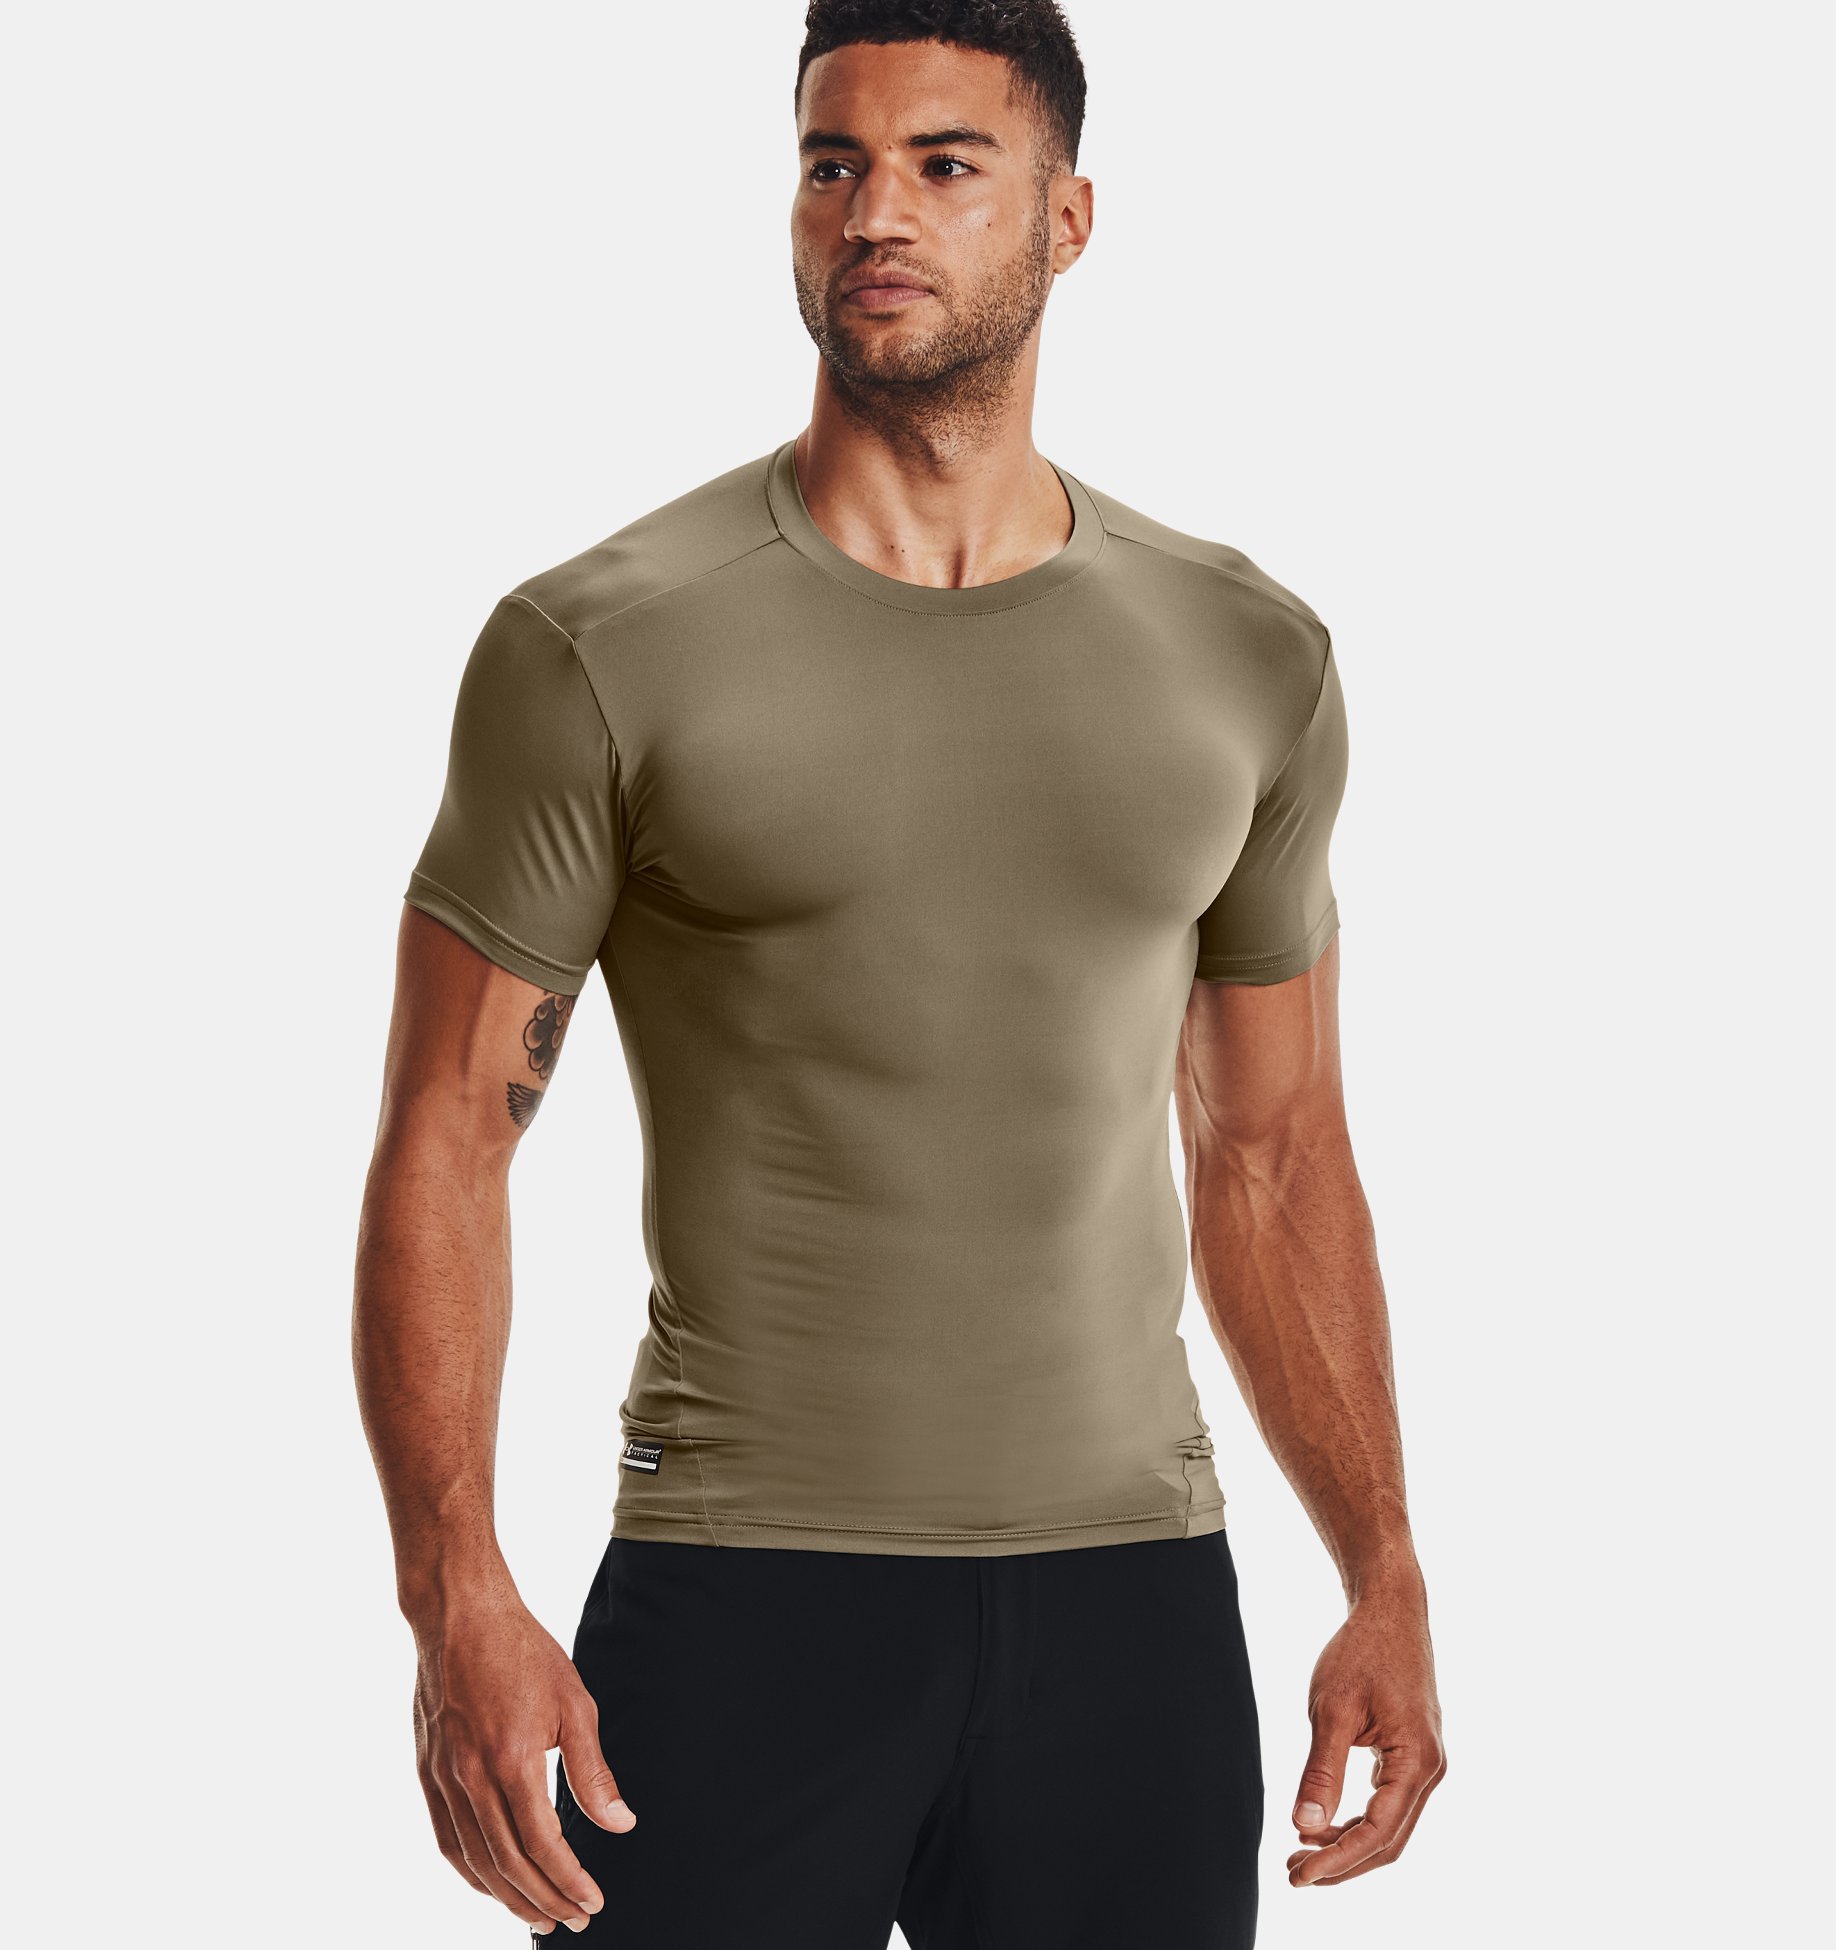 Mens Compression Thermal Under Base Layer Top Short Sleeve Armour Jersey T-shirt 